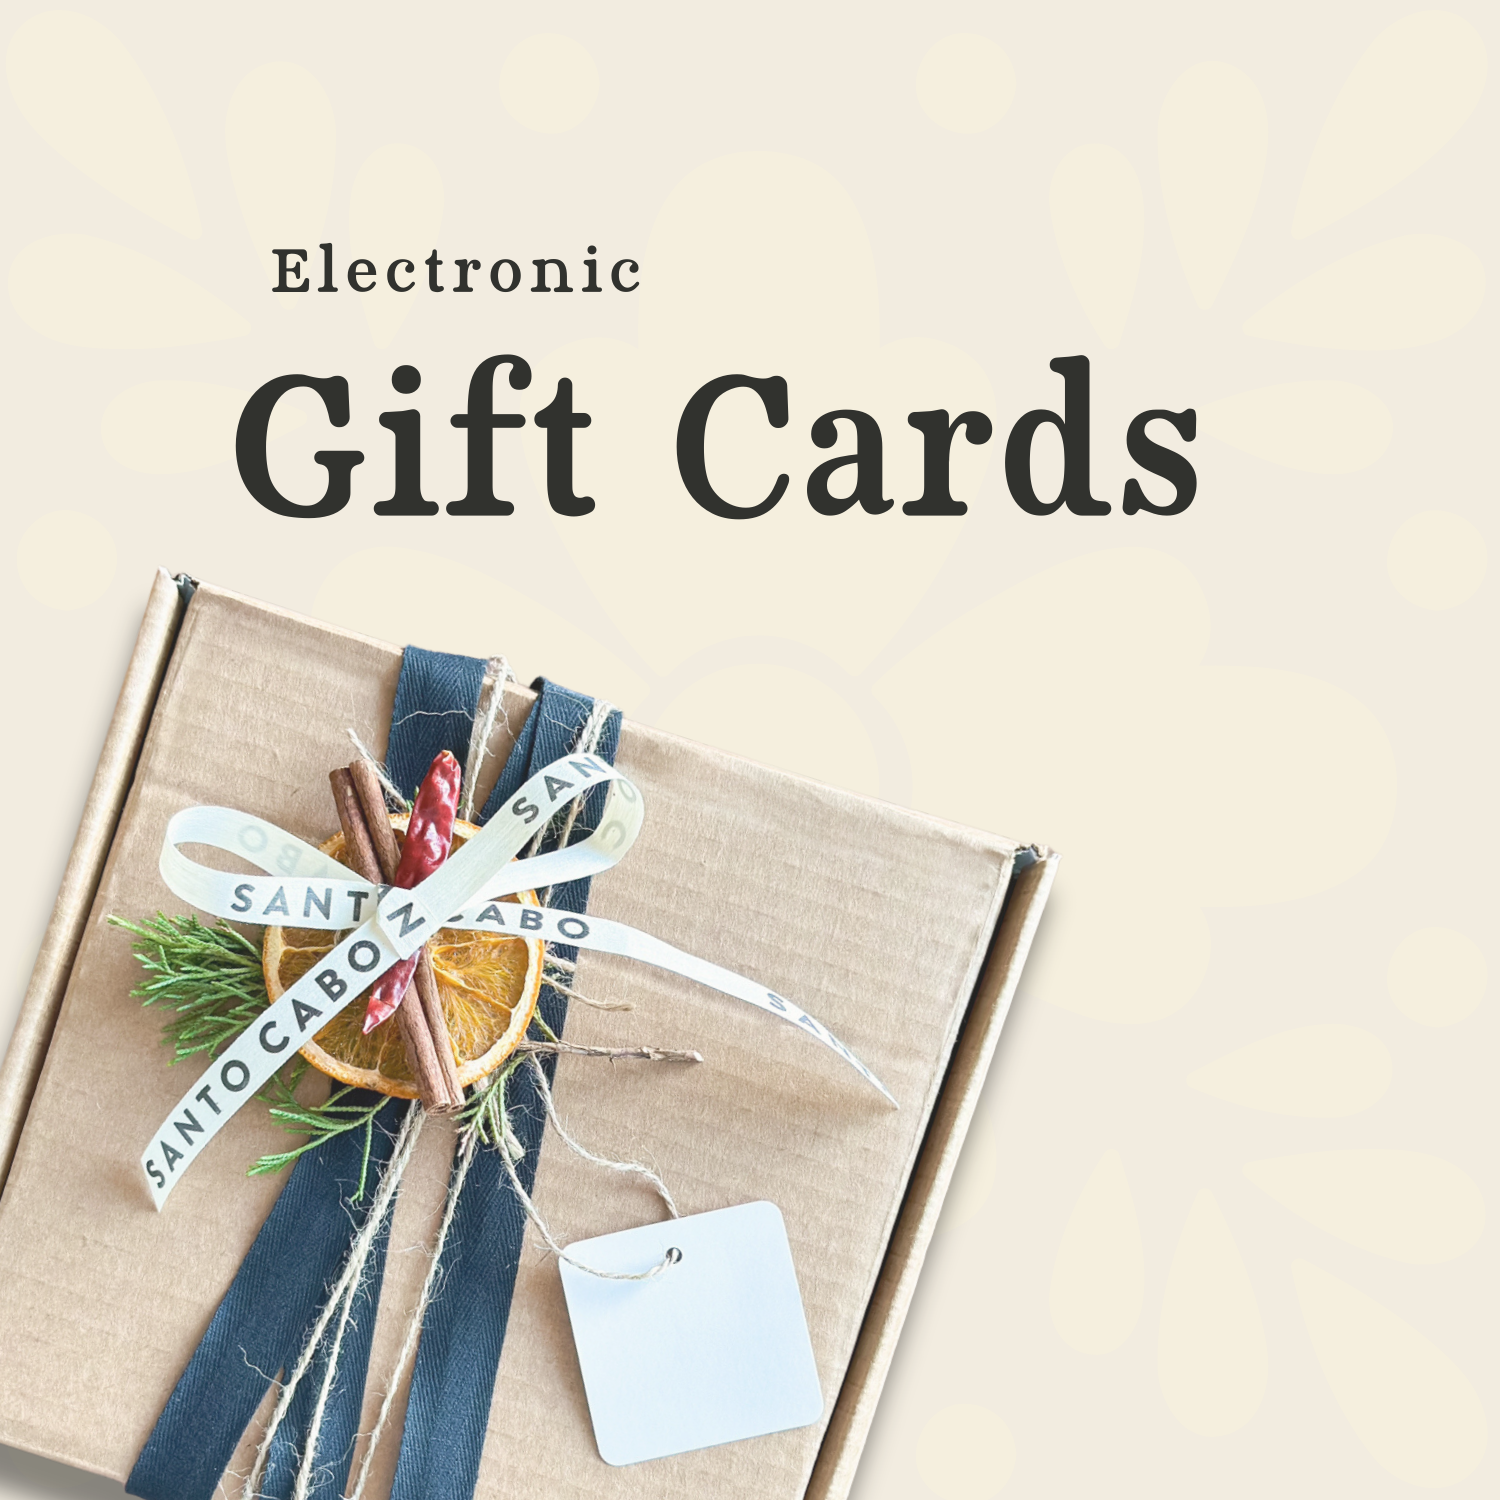 Offers & Gifts | Family Deals, Gifted Memberships, Gift Cards, Vouchers,  Offers and more